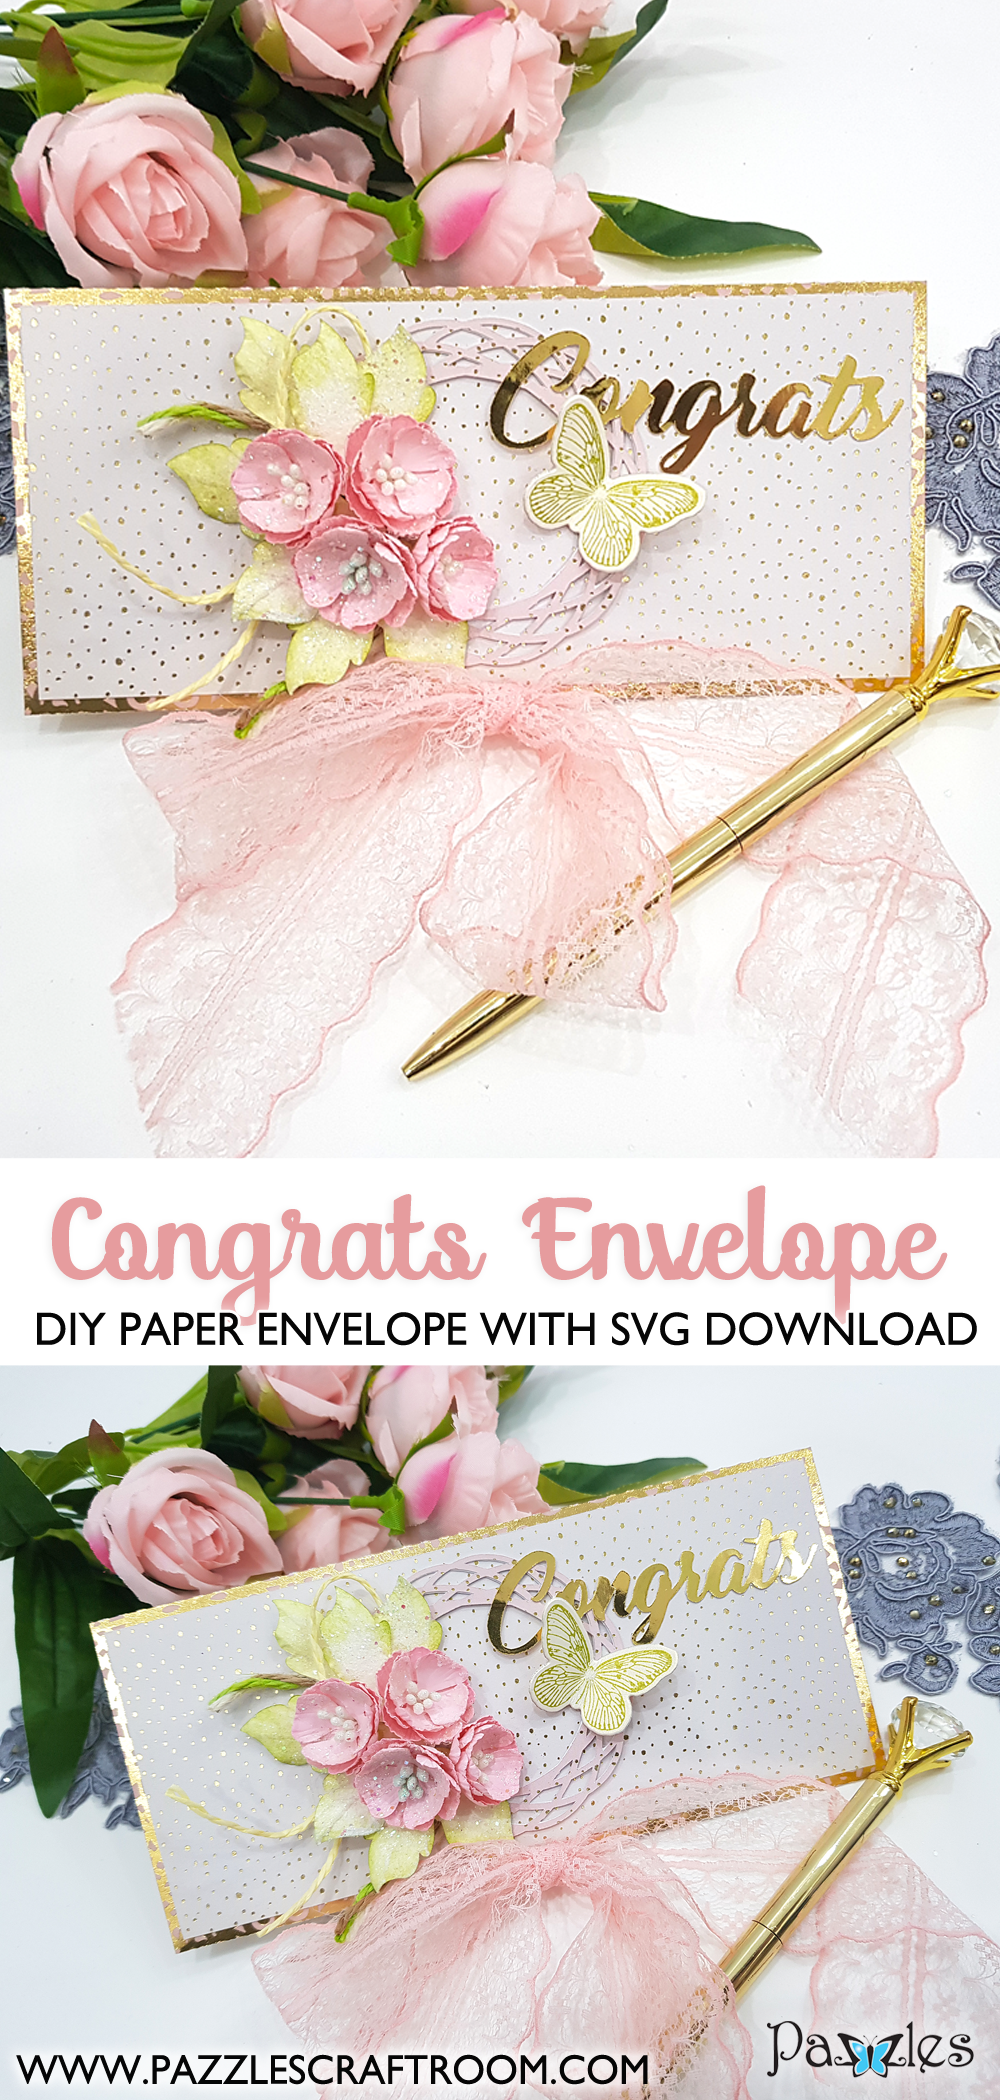 Pazzles DIY Congratulations Envelopes with instant SVG download.  Instant SVG download compatible with all major electronic cutters including Pazzles Inspiration, Cricut, and Silhouette Cameo. Design by Nida Tanweer.